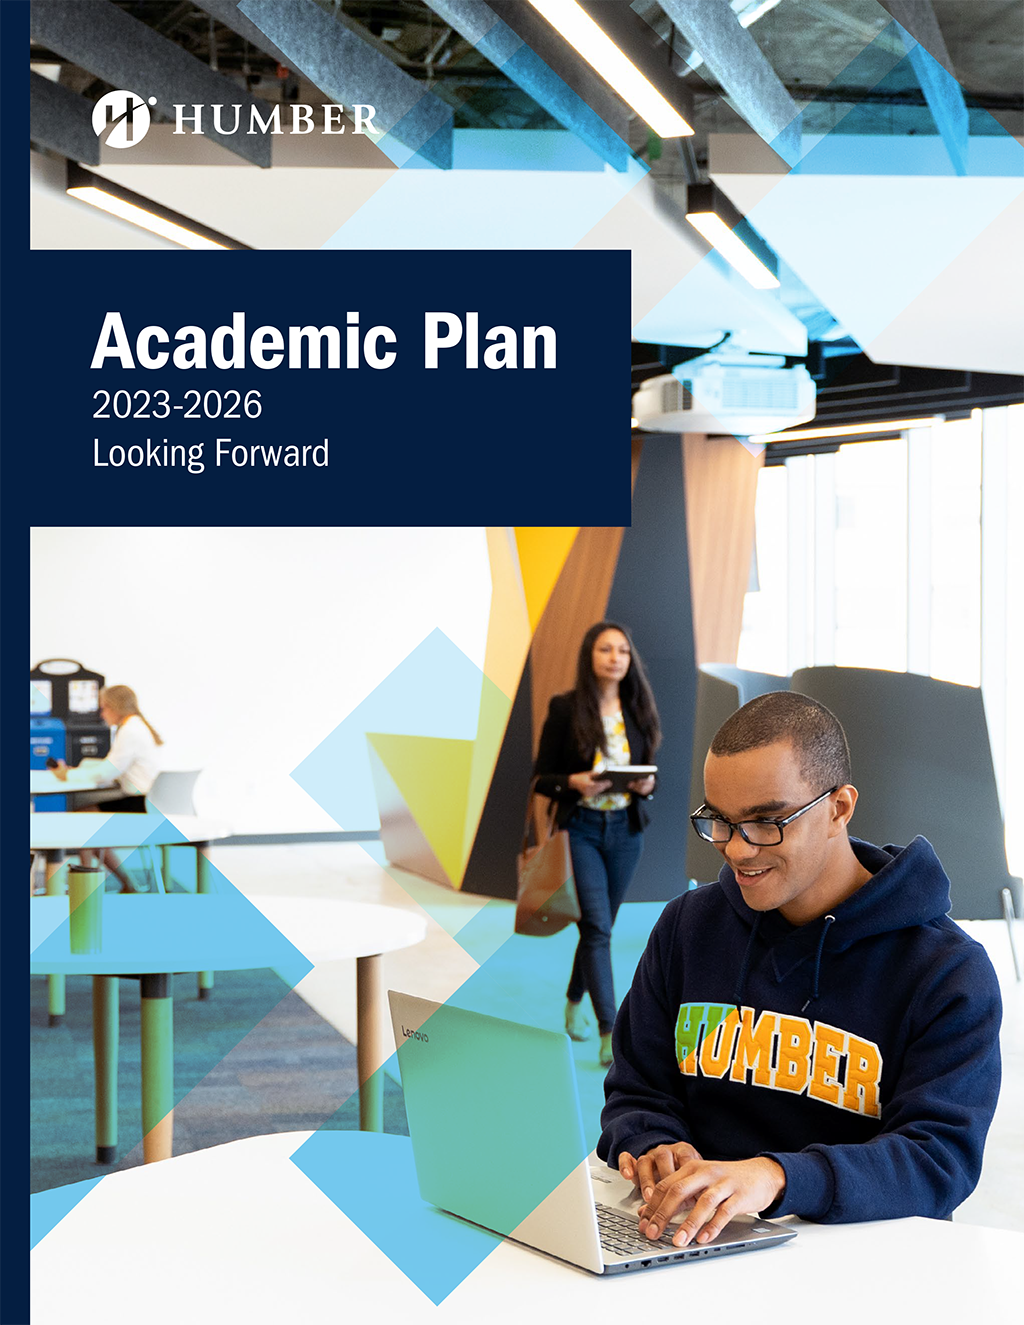 Academic Plan PDF cover - student working on a laptop, another student walks towards him in the background